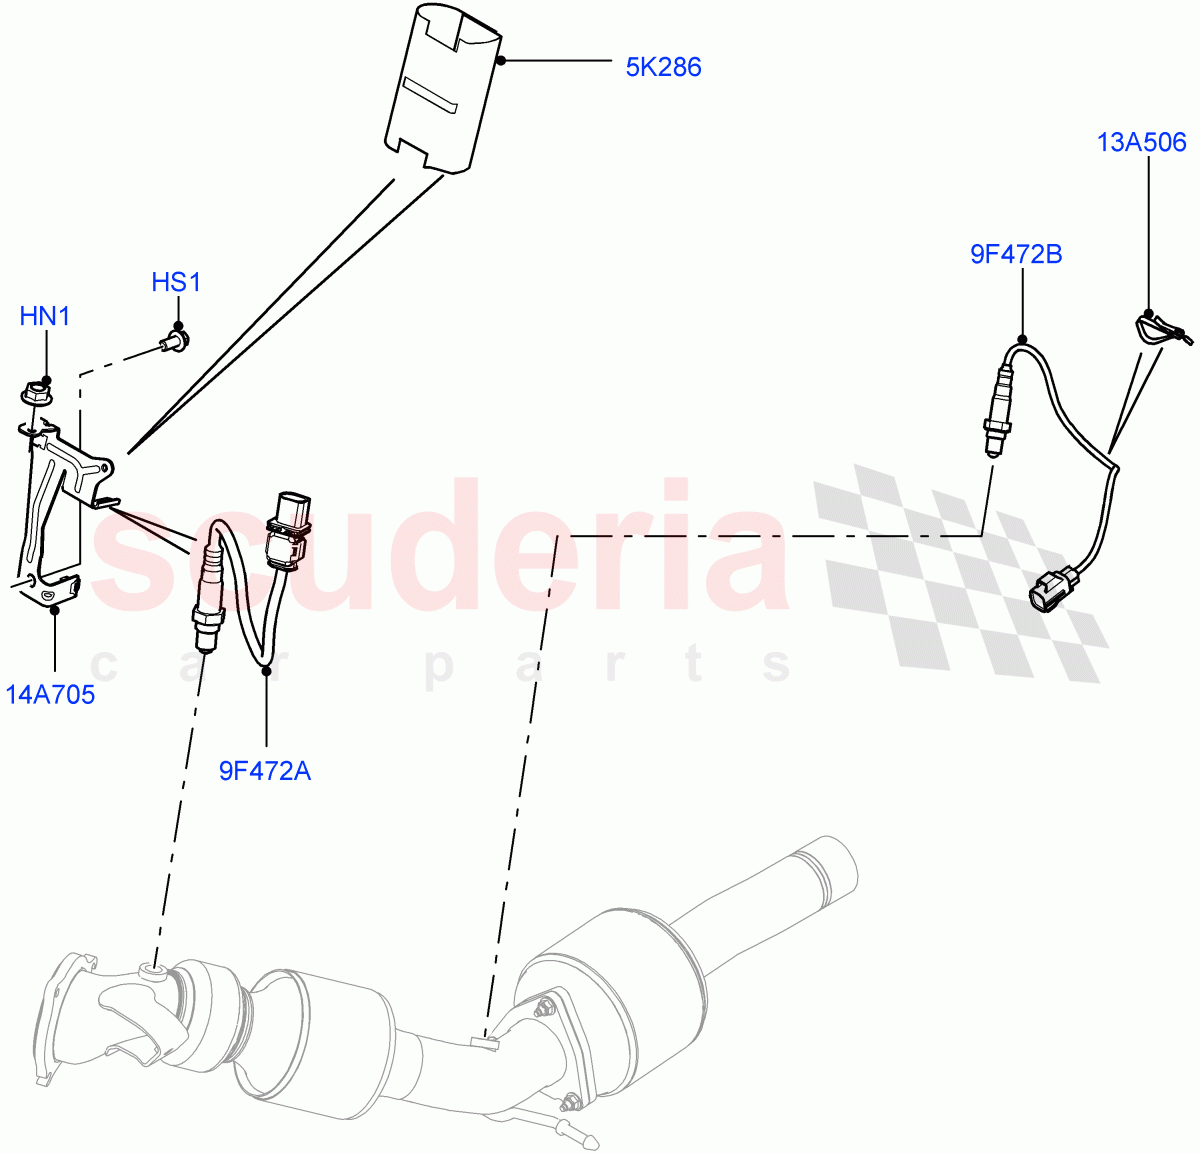 Exhaust System(Exhaust System Sensors)(2.0L 16V TIVCT T/C 240PS Petrol,Halewood (UK)) of Land Rover Land Rover Discovery Sport (2015+) [2.0 Turbo Petrol GTDI]